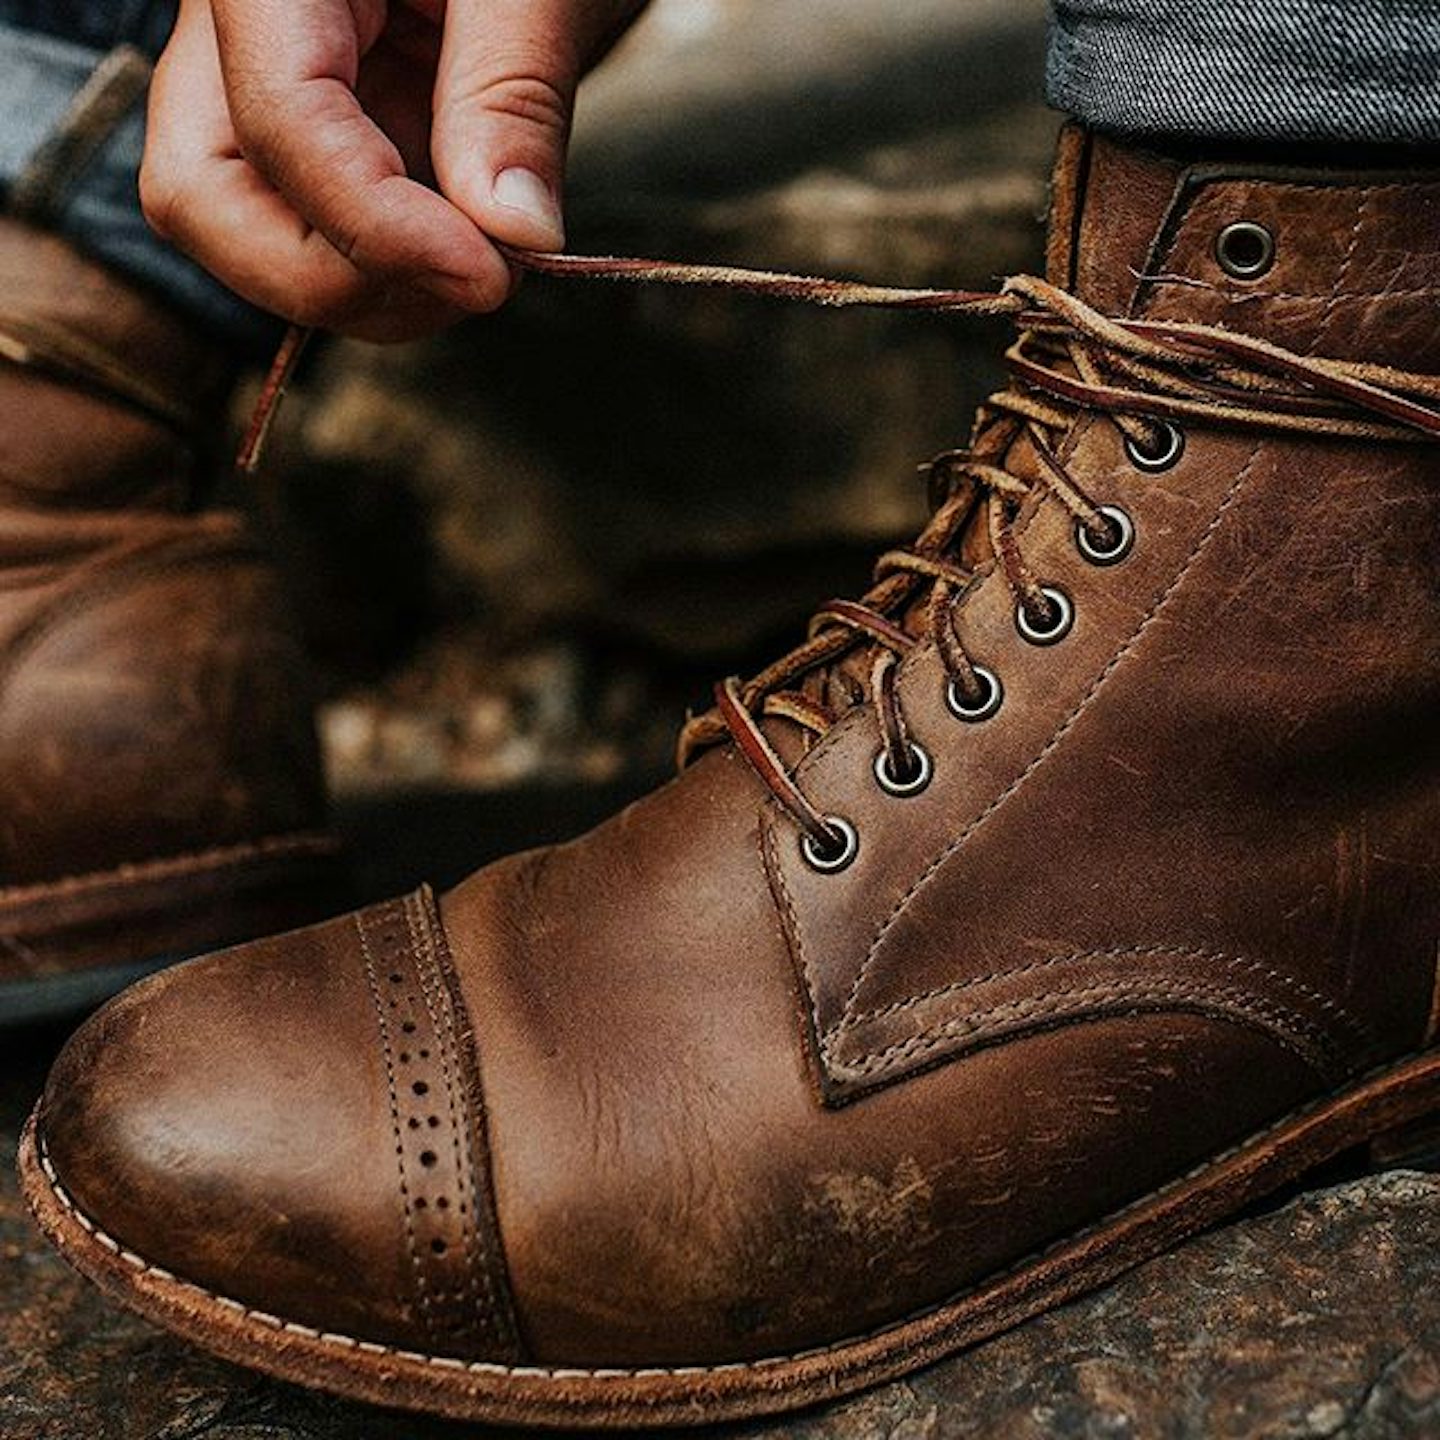 Lacing-up the Oak Street Bootmakers Cap-Toe Trench Boot in Natural Chromexcel